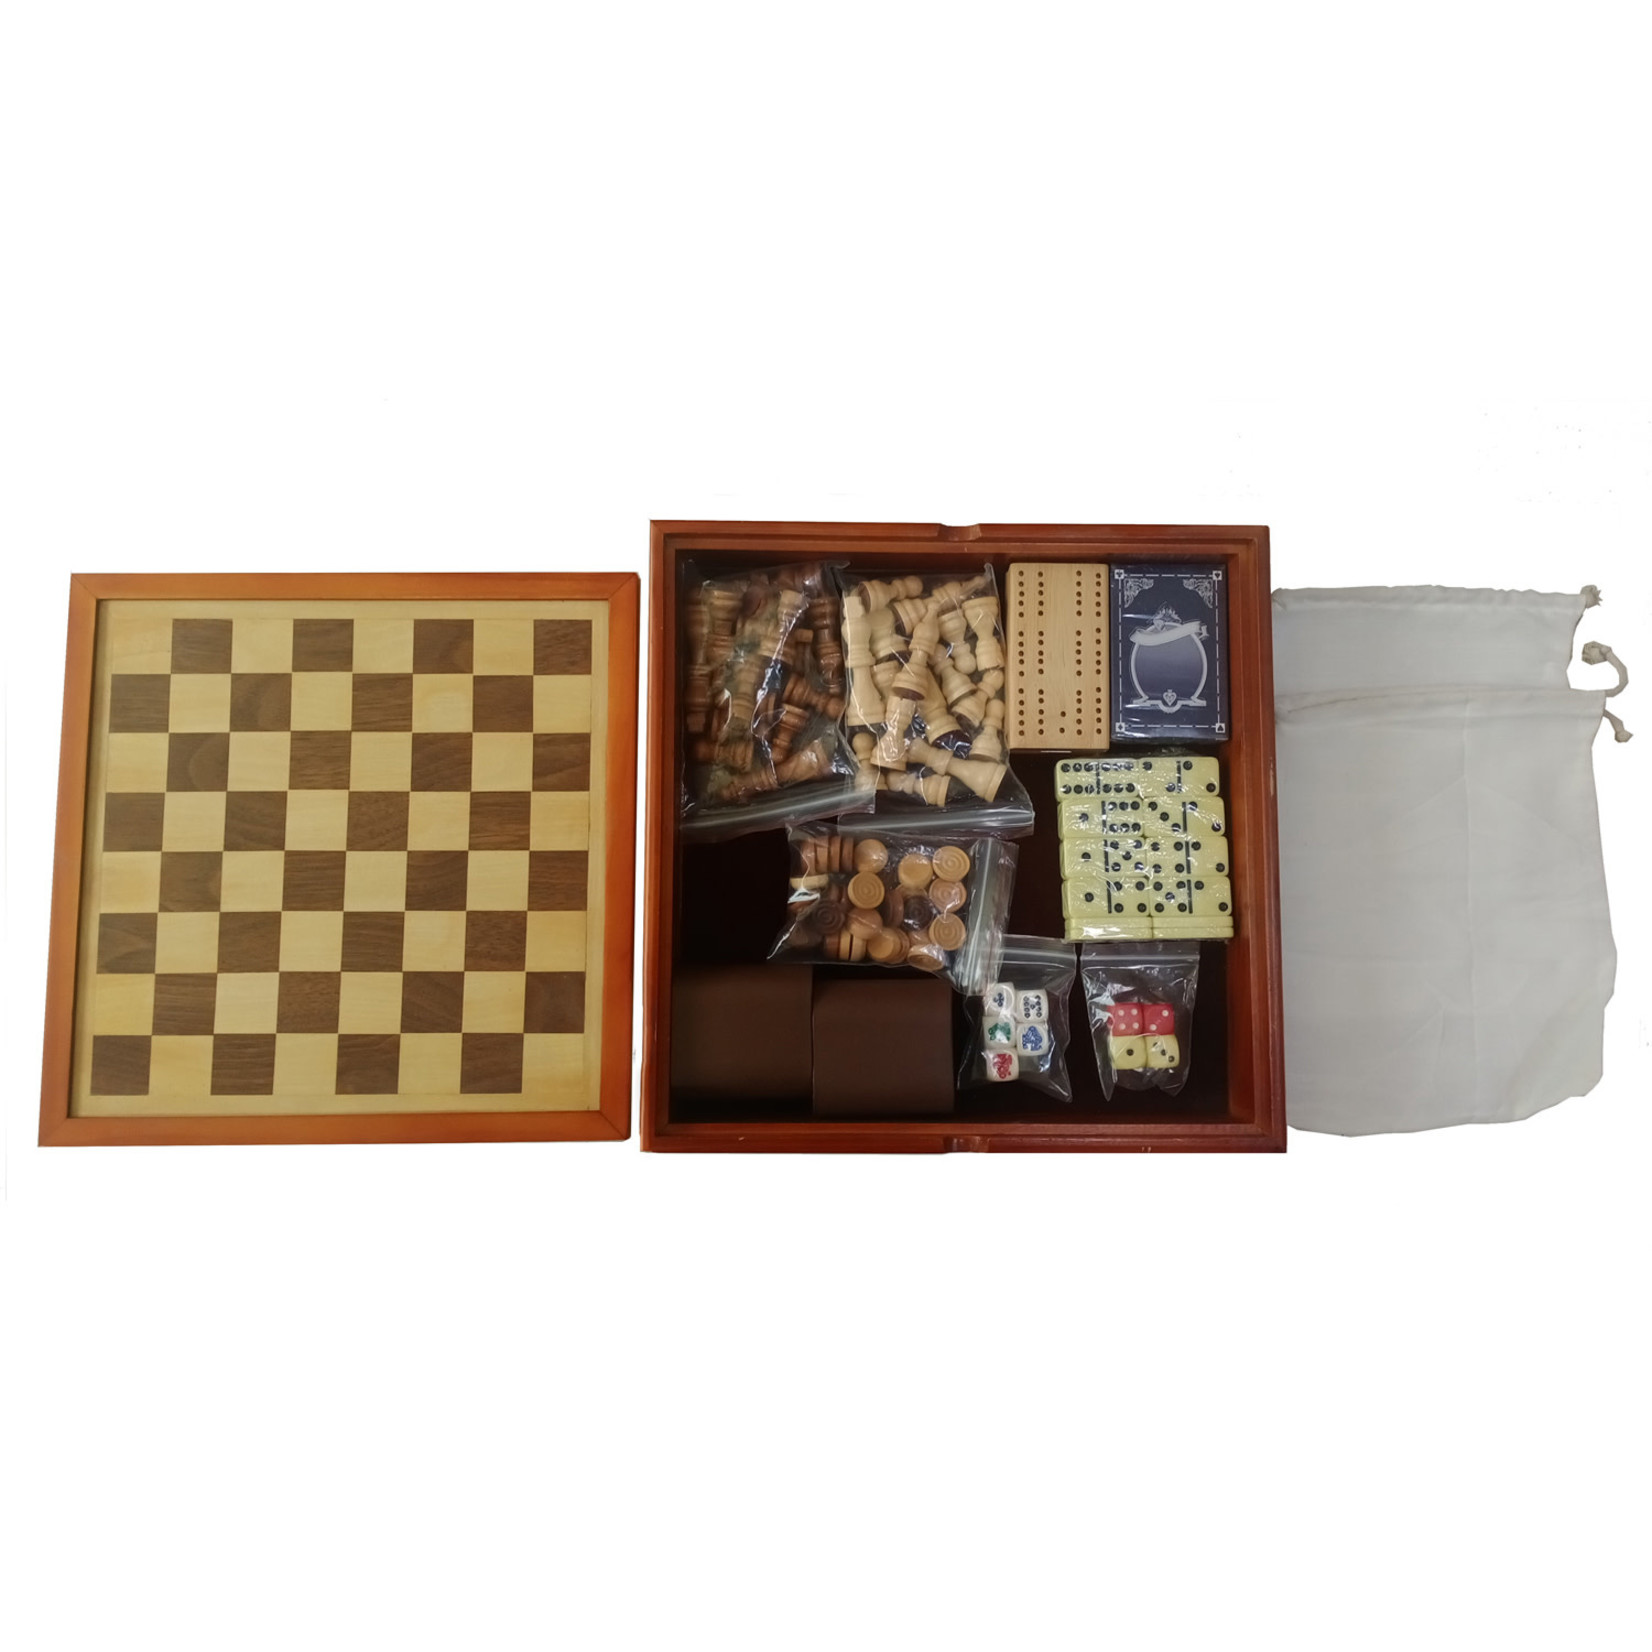 Wood Expressions 12-Inch Wooden Game Set (Chess, Checkers, Backgammon, Dominoes, Cribbage, Poker Dice, Cards)